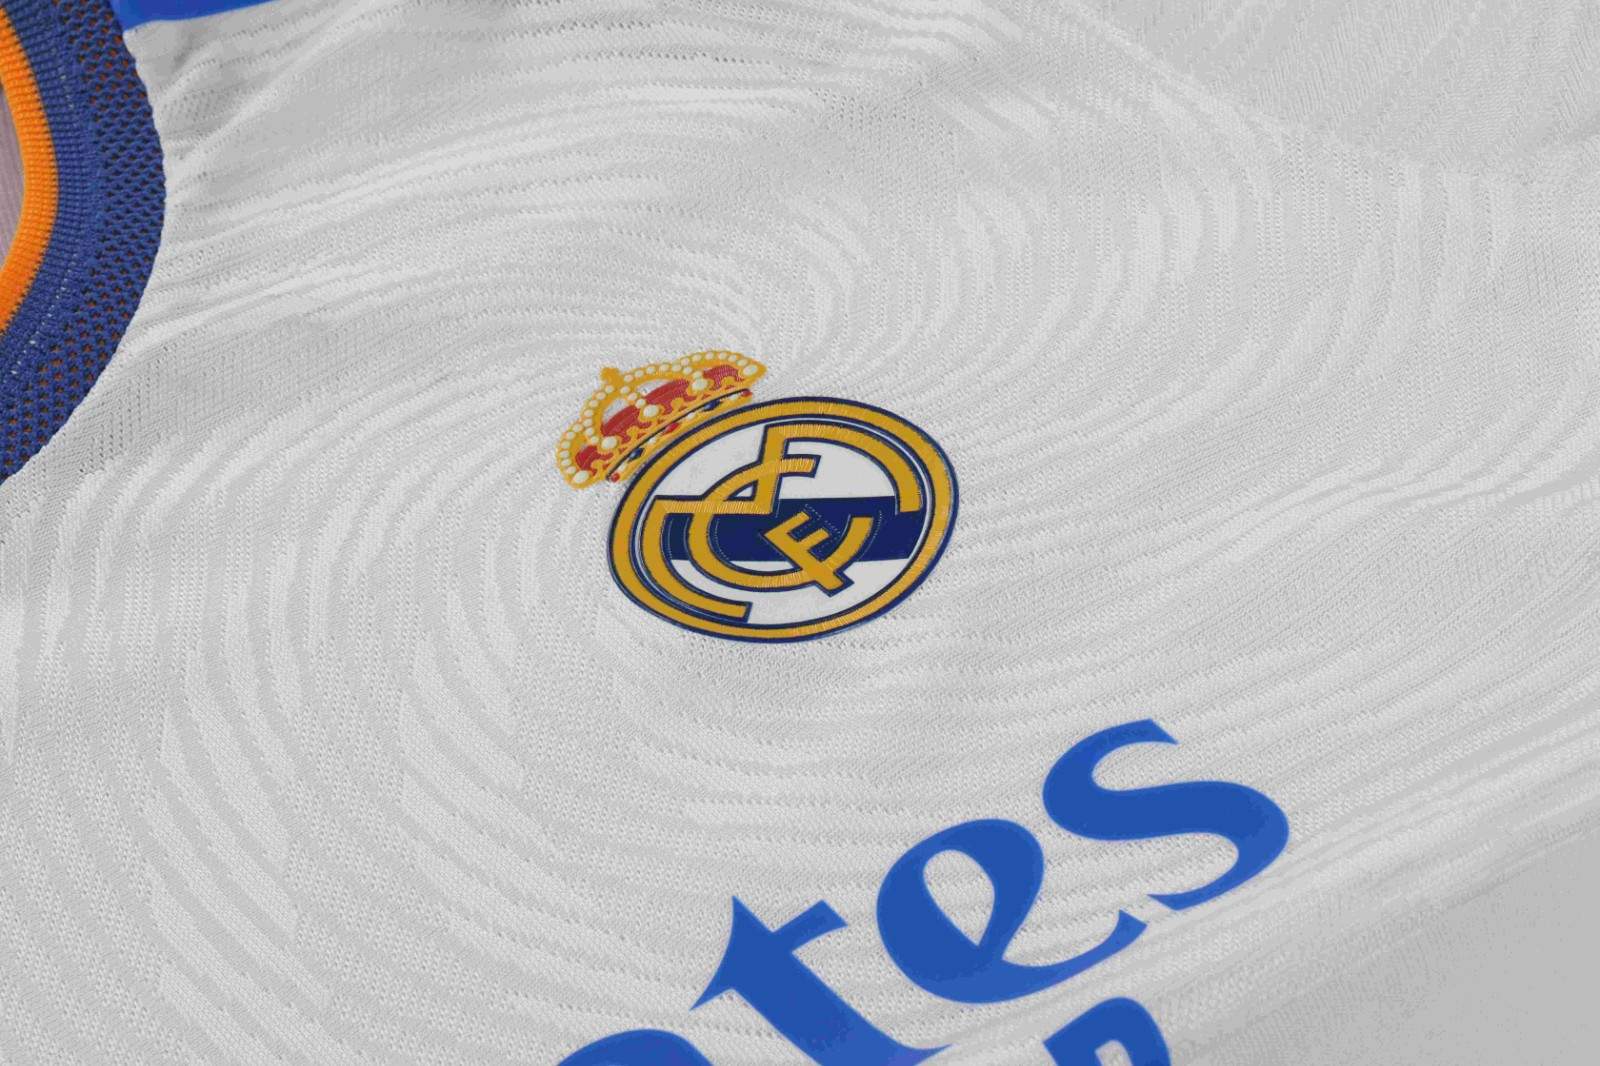 player version real madrid home jersey shirt 2021-22